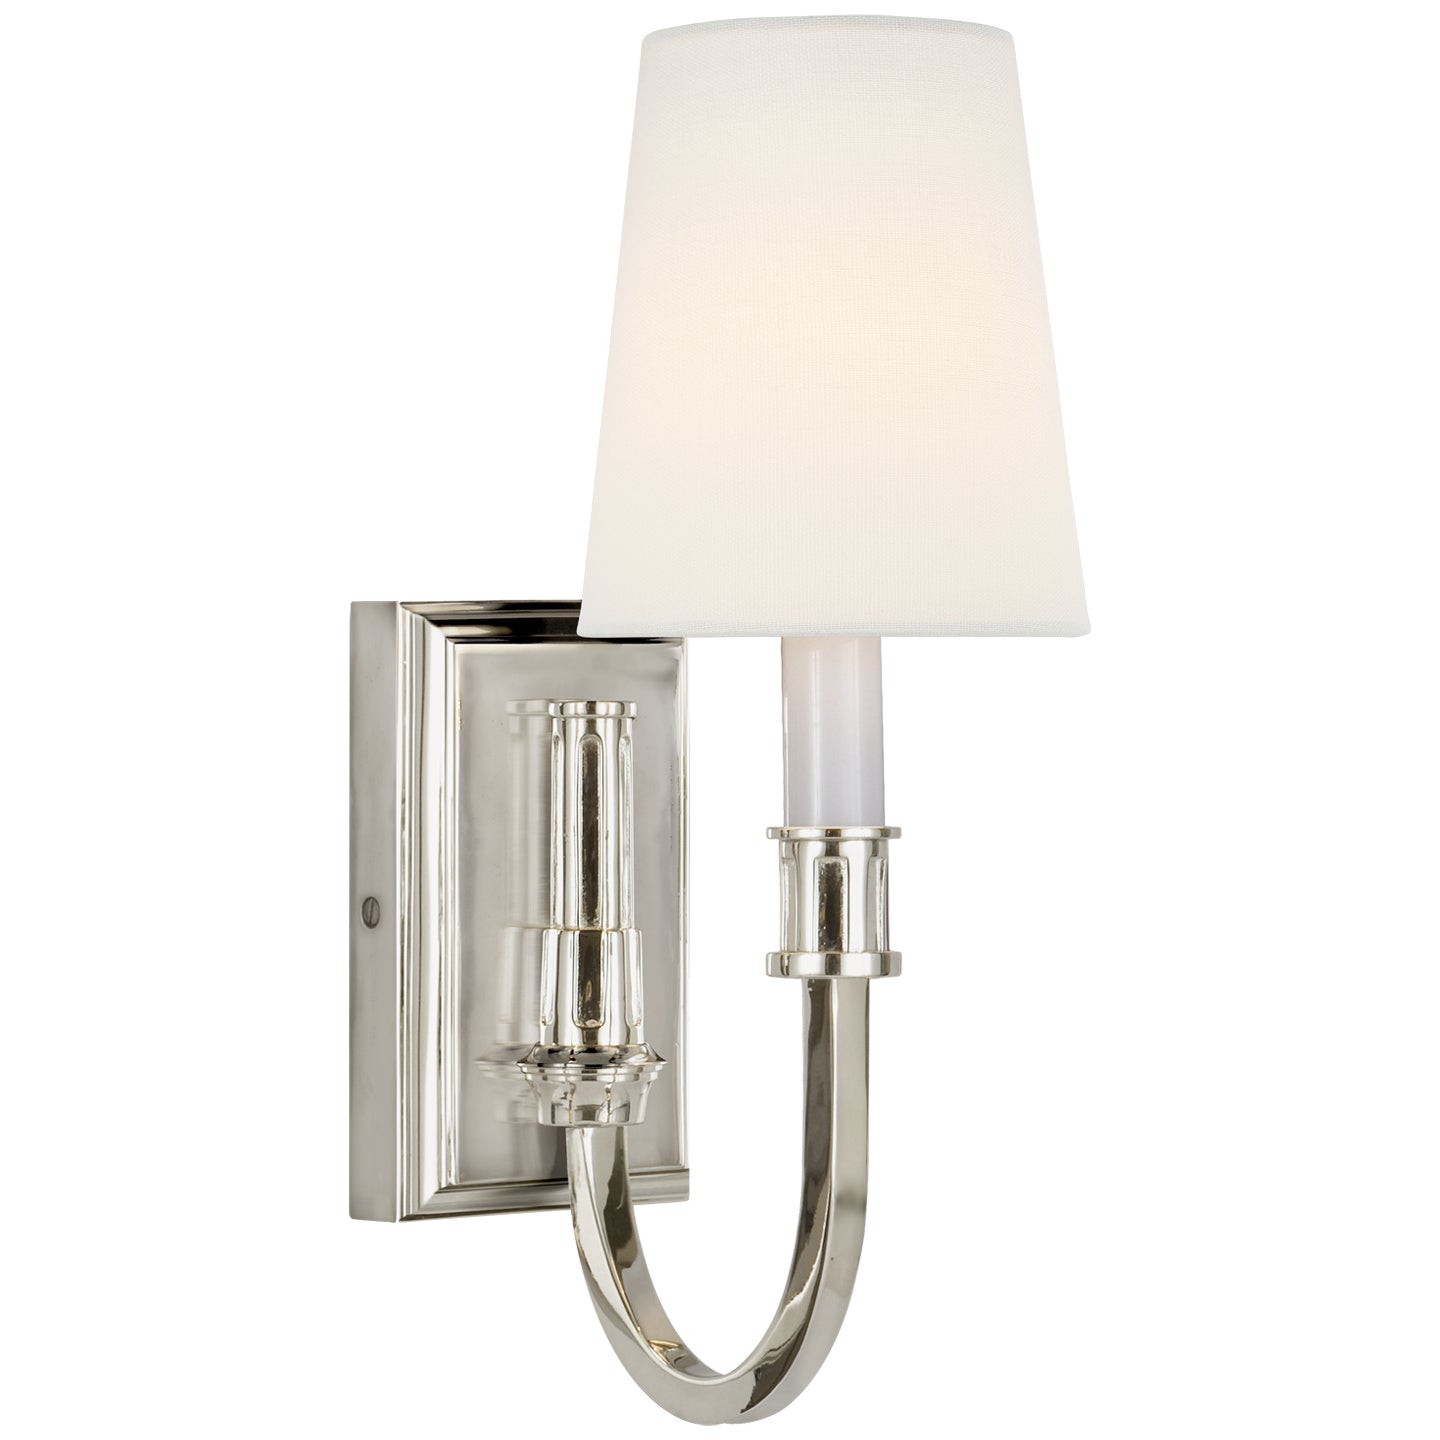 Visual Comfort Signature - TOB 2327PN-L - One Light Wall Sconce - Modern Library - Polished Nickel